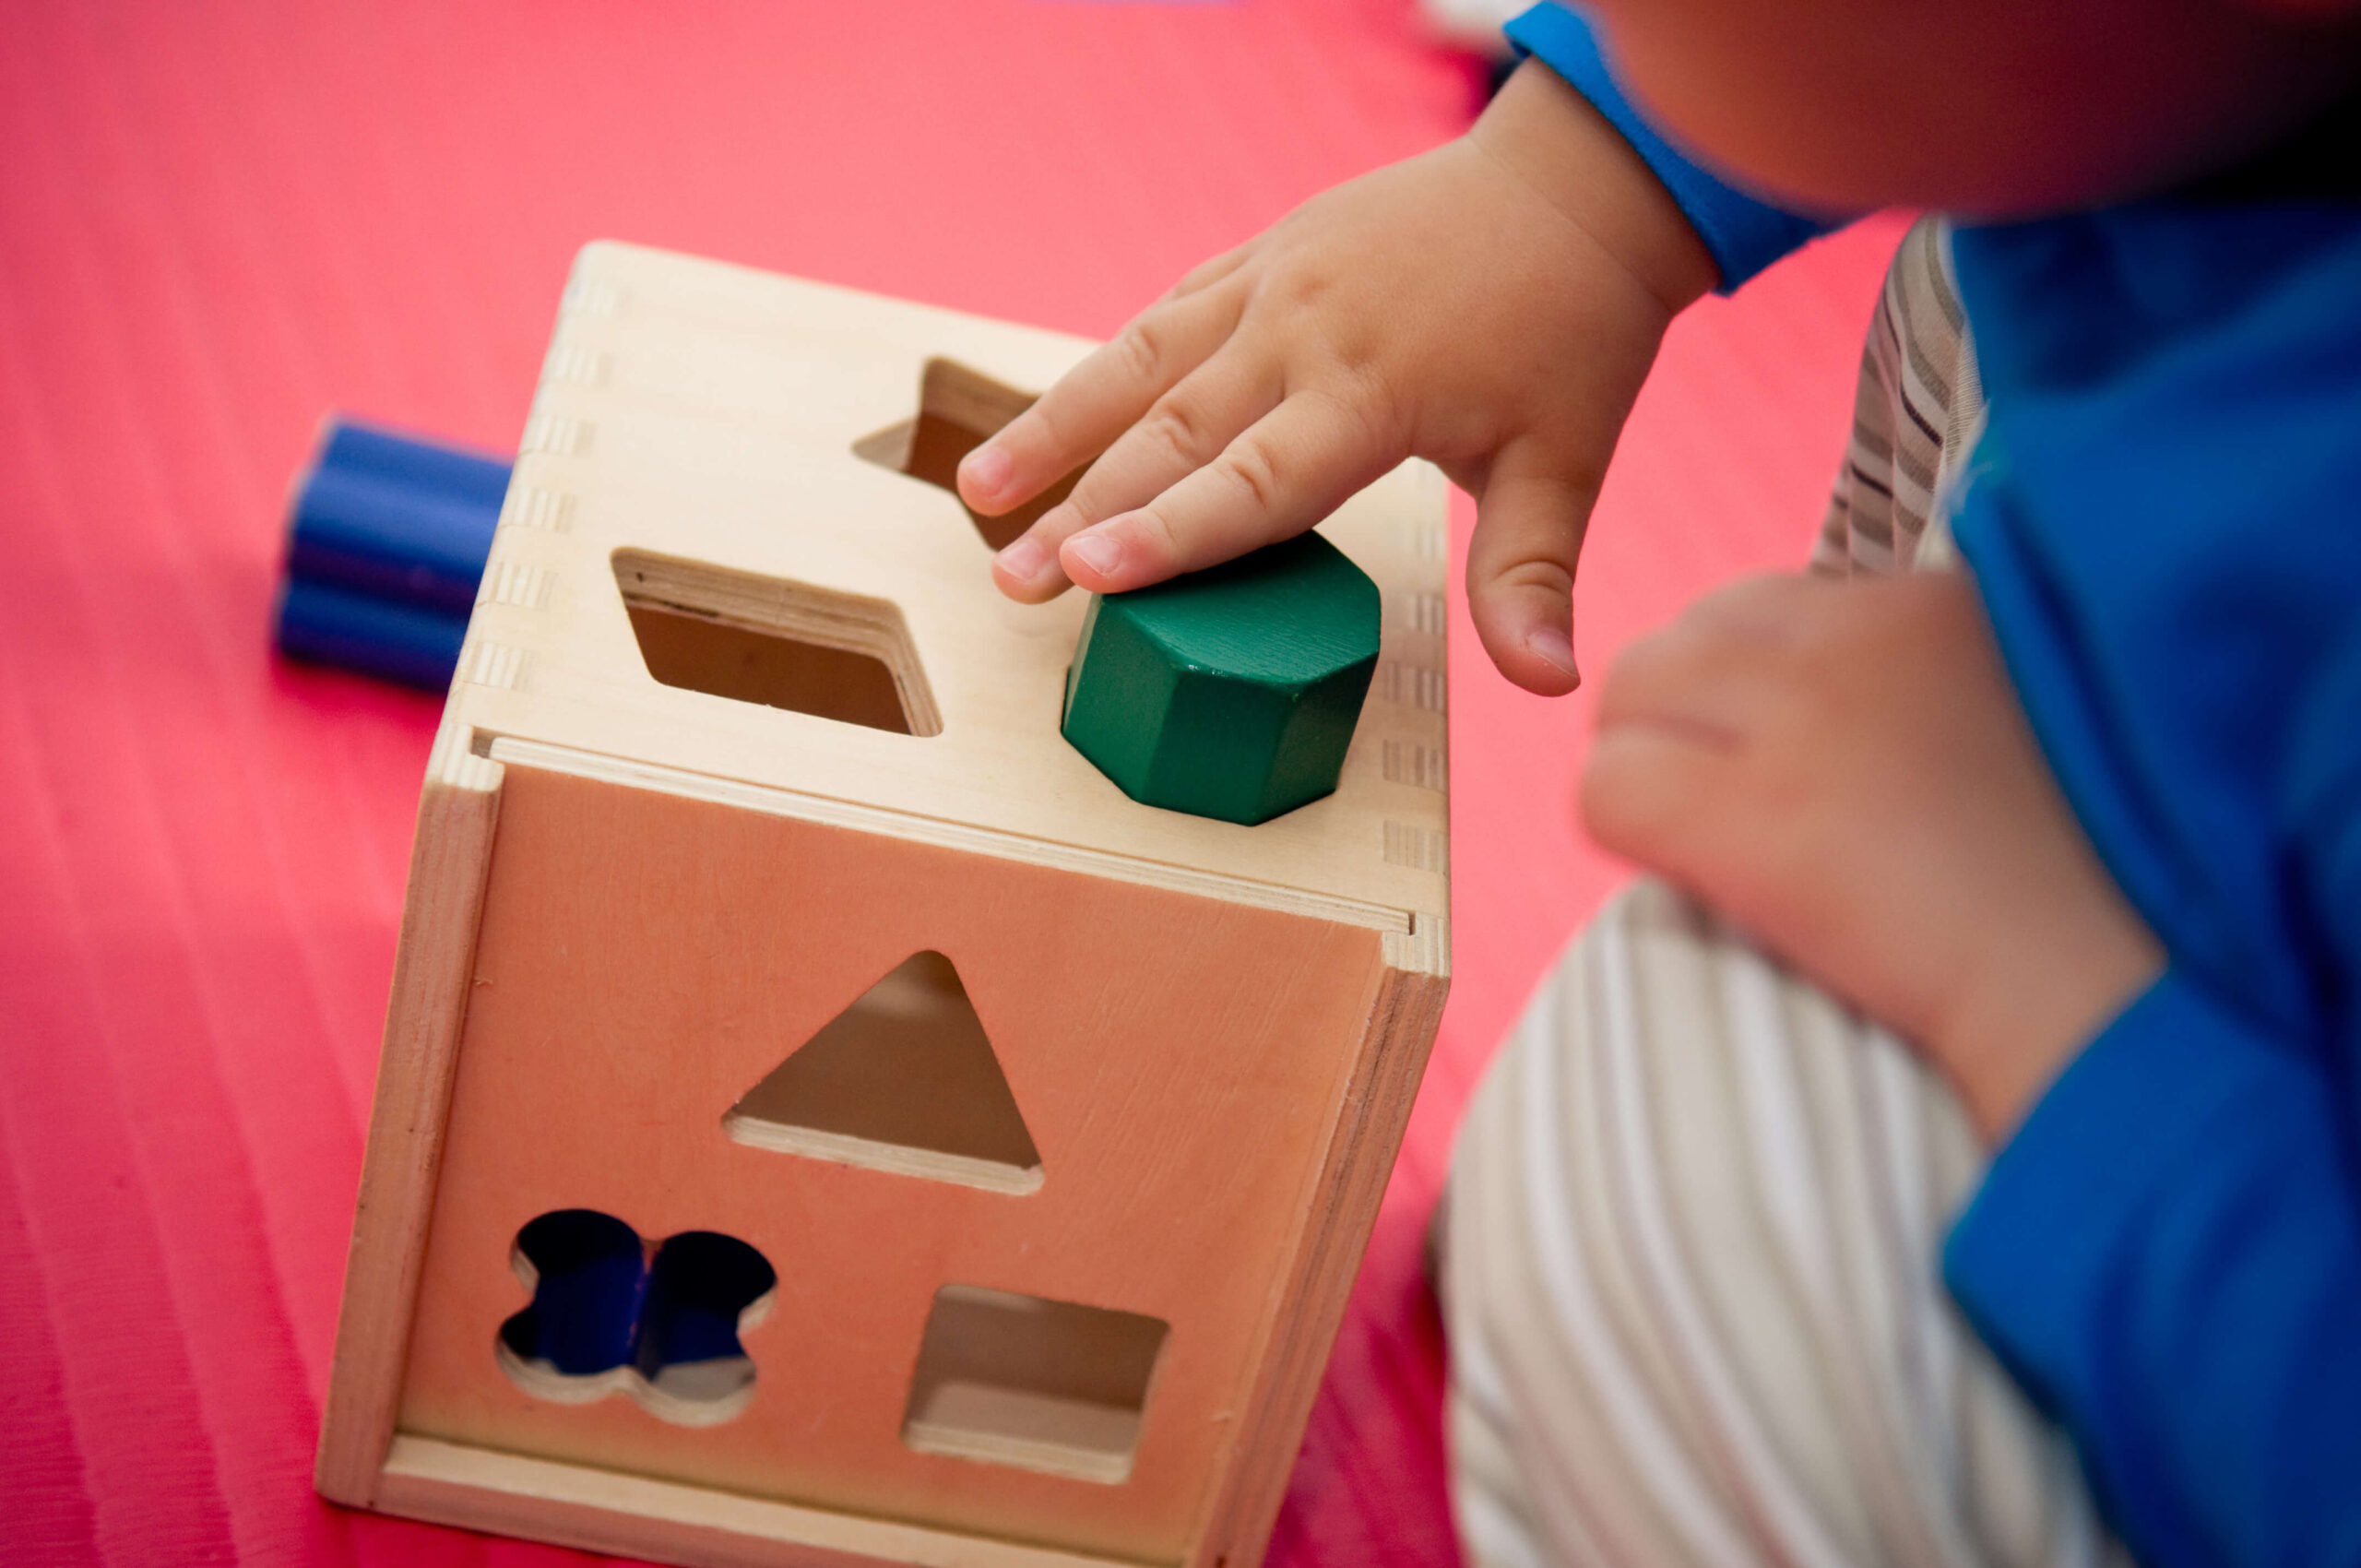 Child playing with blocks and shapes